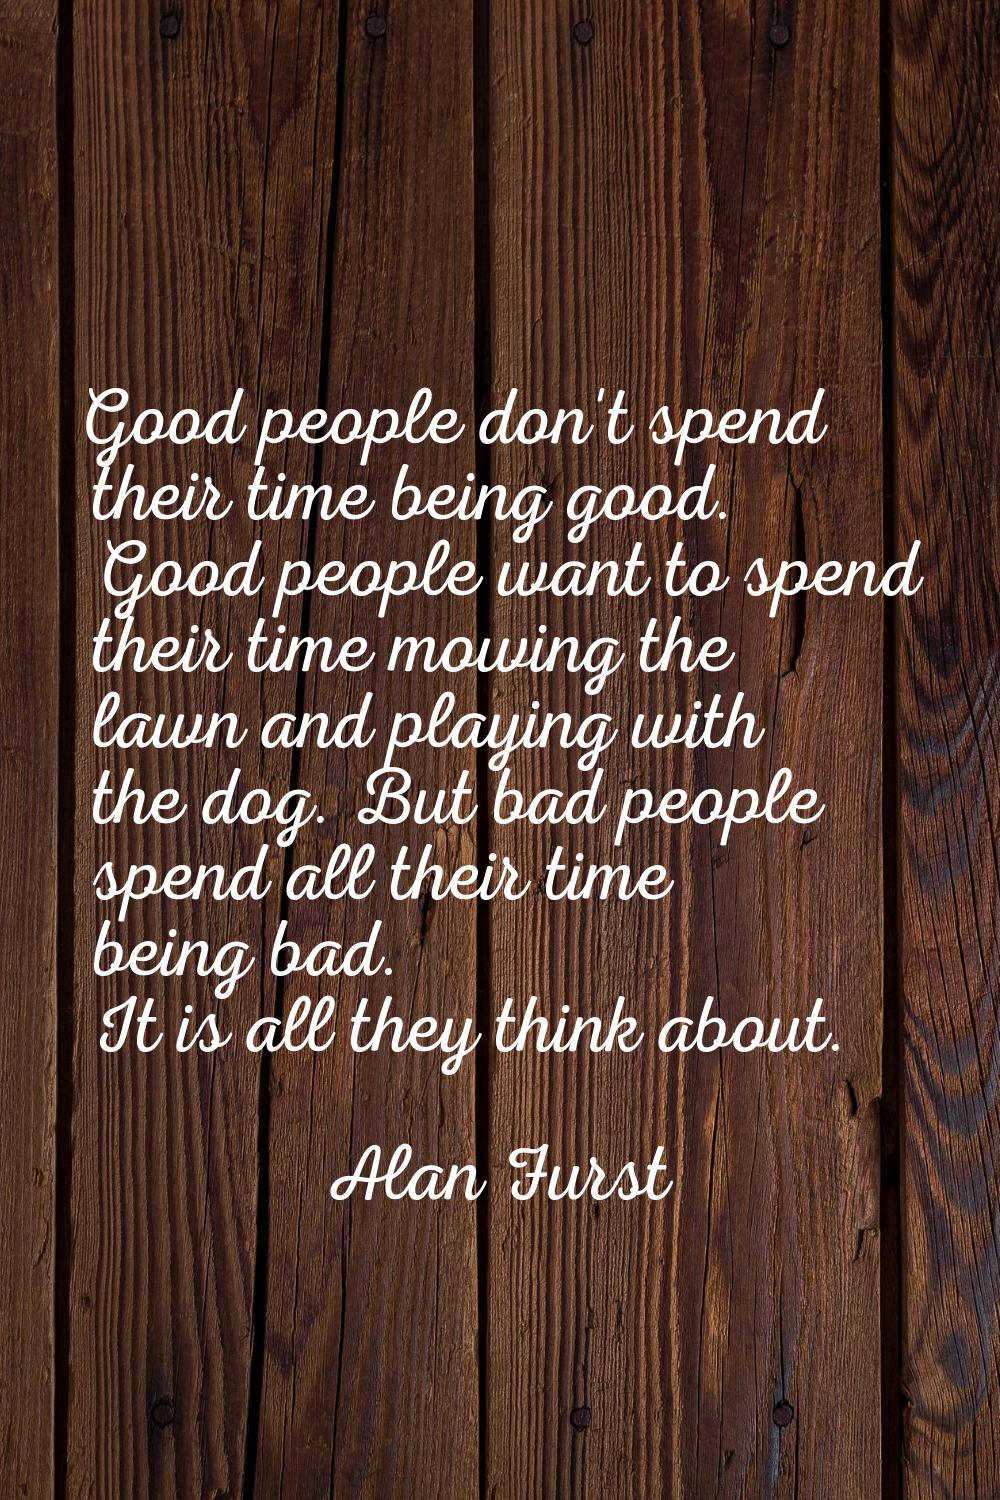 Good people don't spend their time being good. Good people want to spend their time mowing the lawn